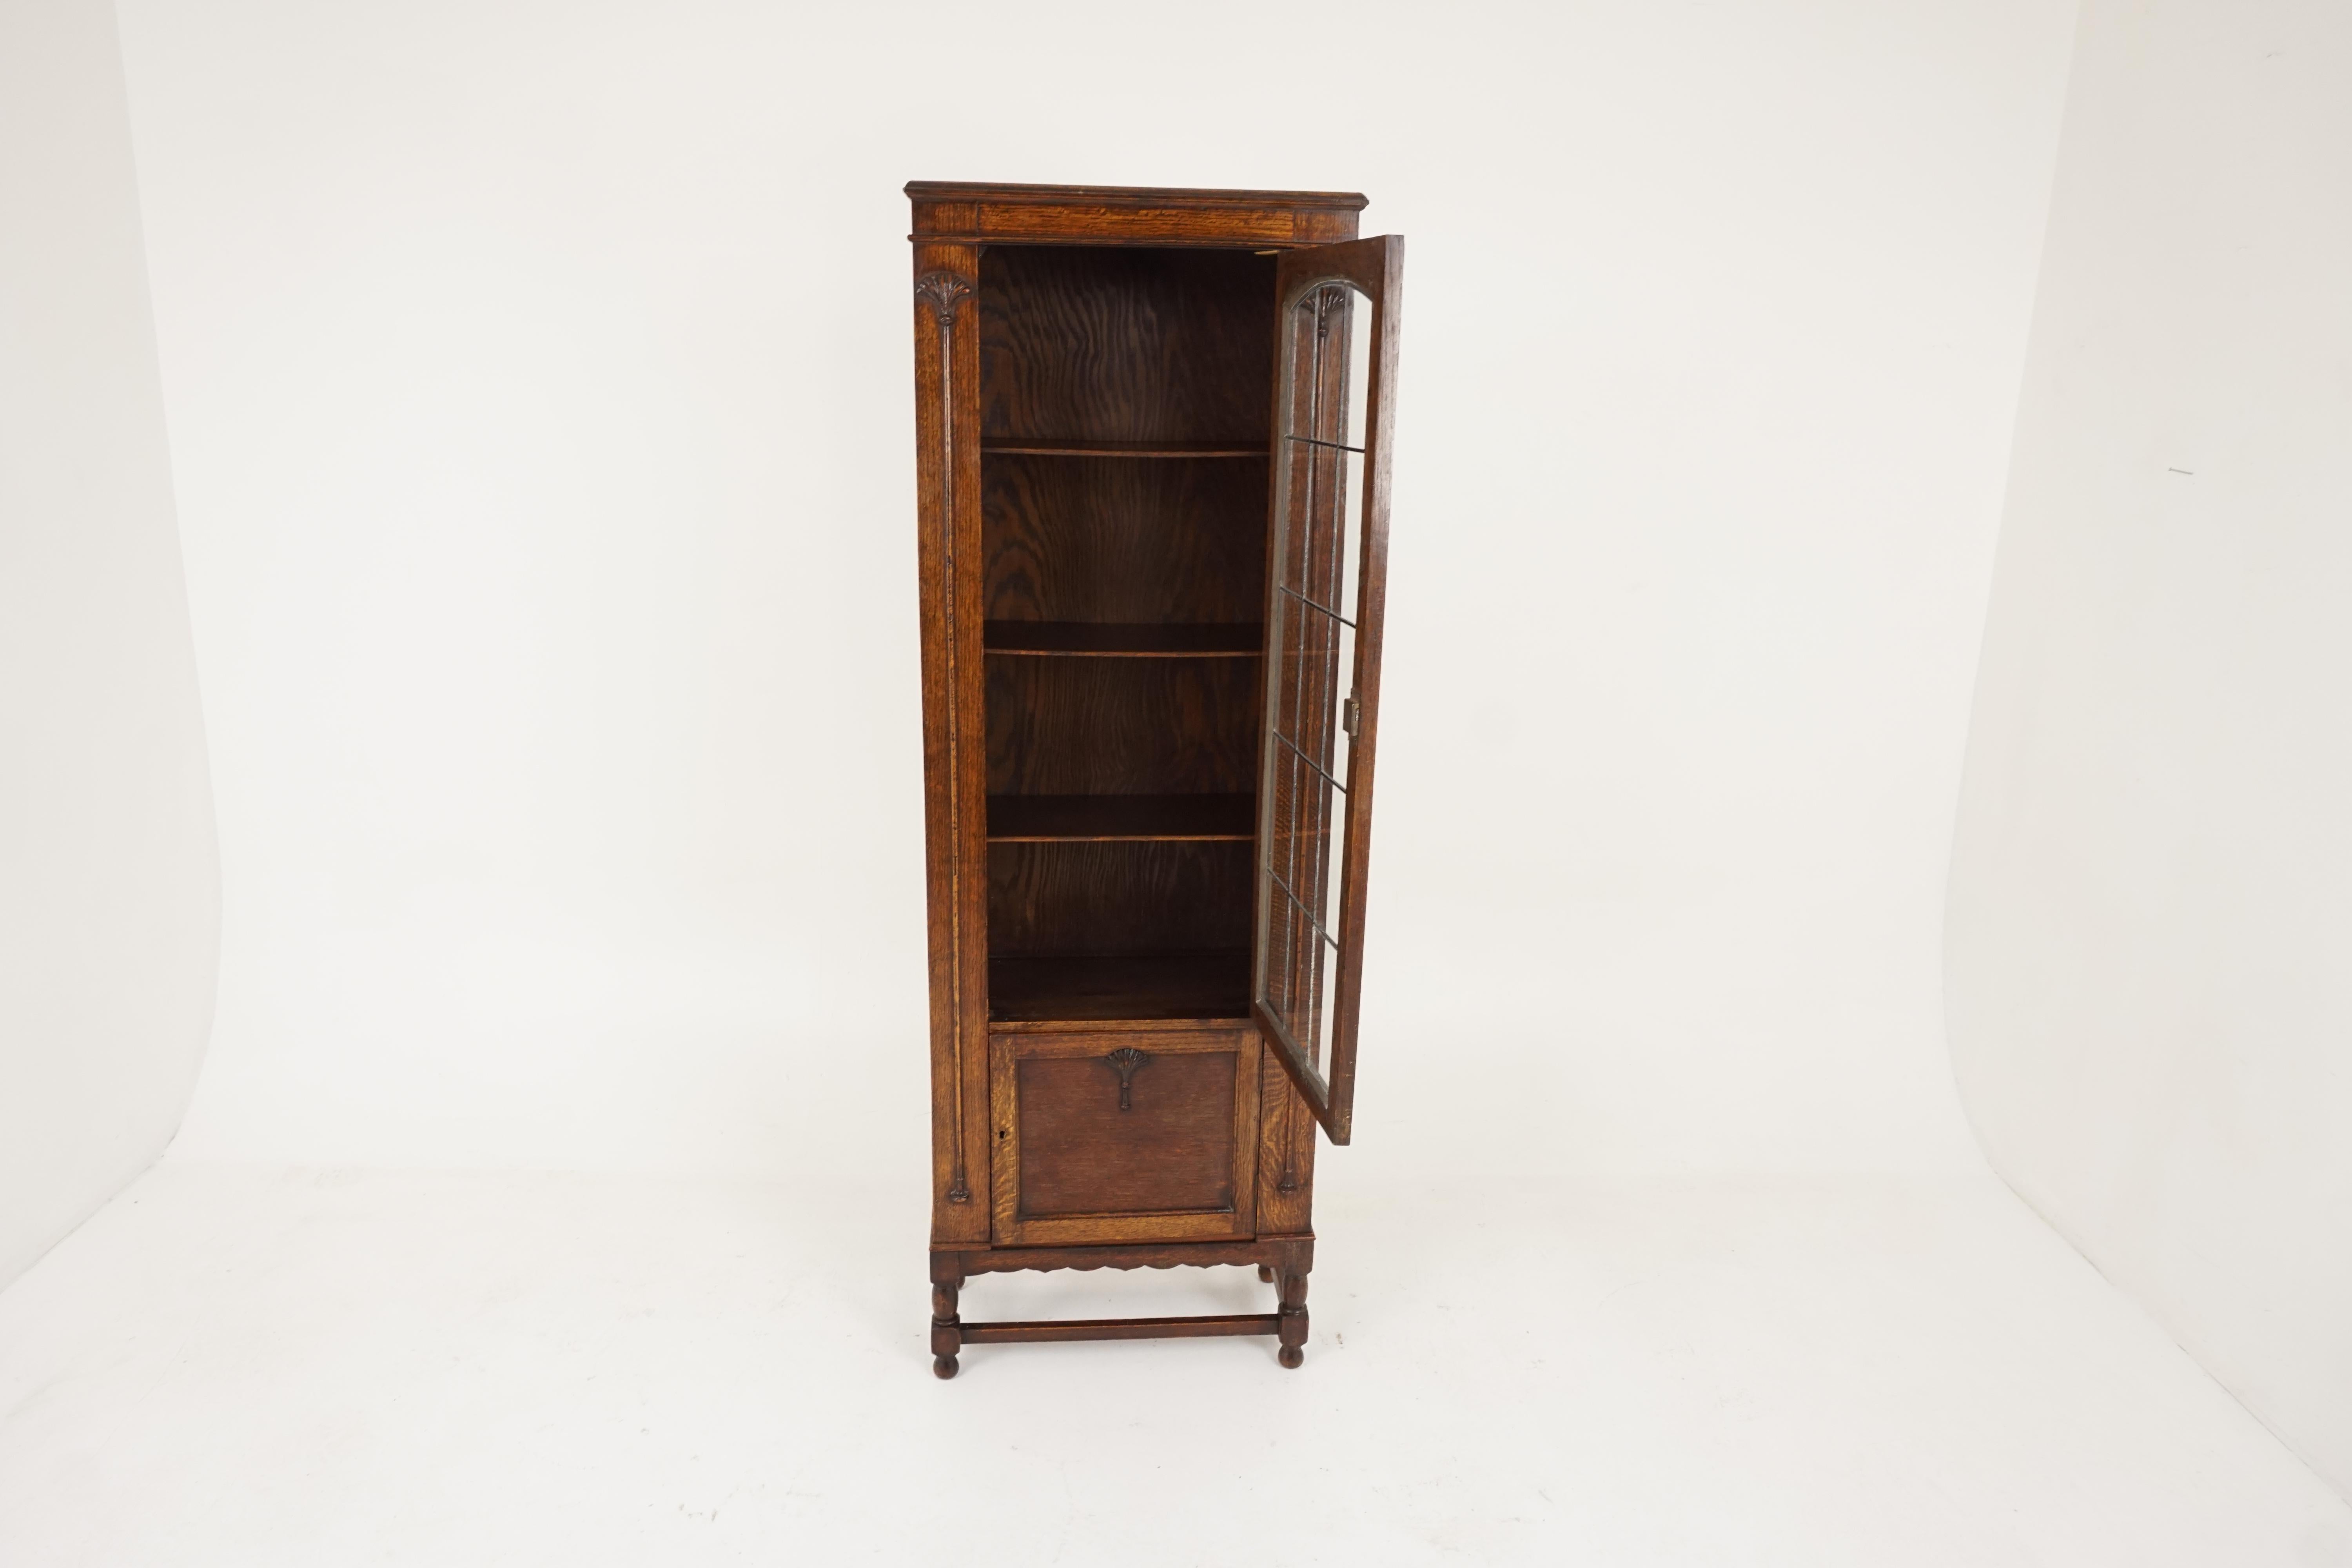 Antique leaded glass bookcase, tiger oak display cabinet, Scotland 1920, B2175

Scotland, 1920
Solid oak
Original finish
Rectangular top
Single leaded glass doors
Opens to reveal three adjustable wooden shelves
Carved mouldings on the